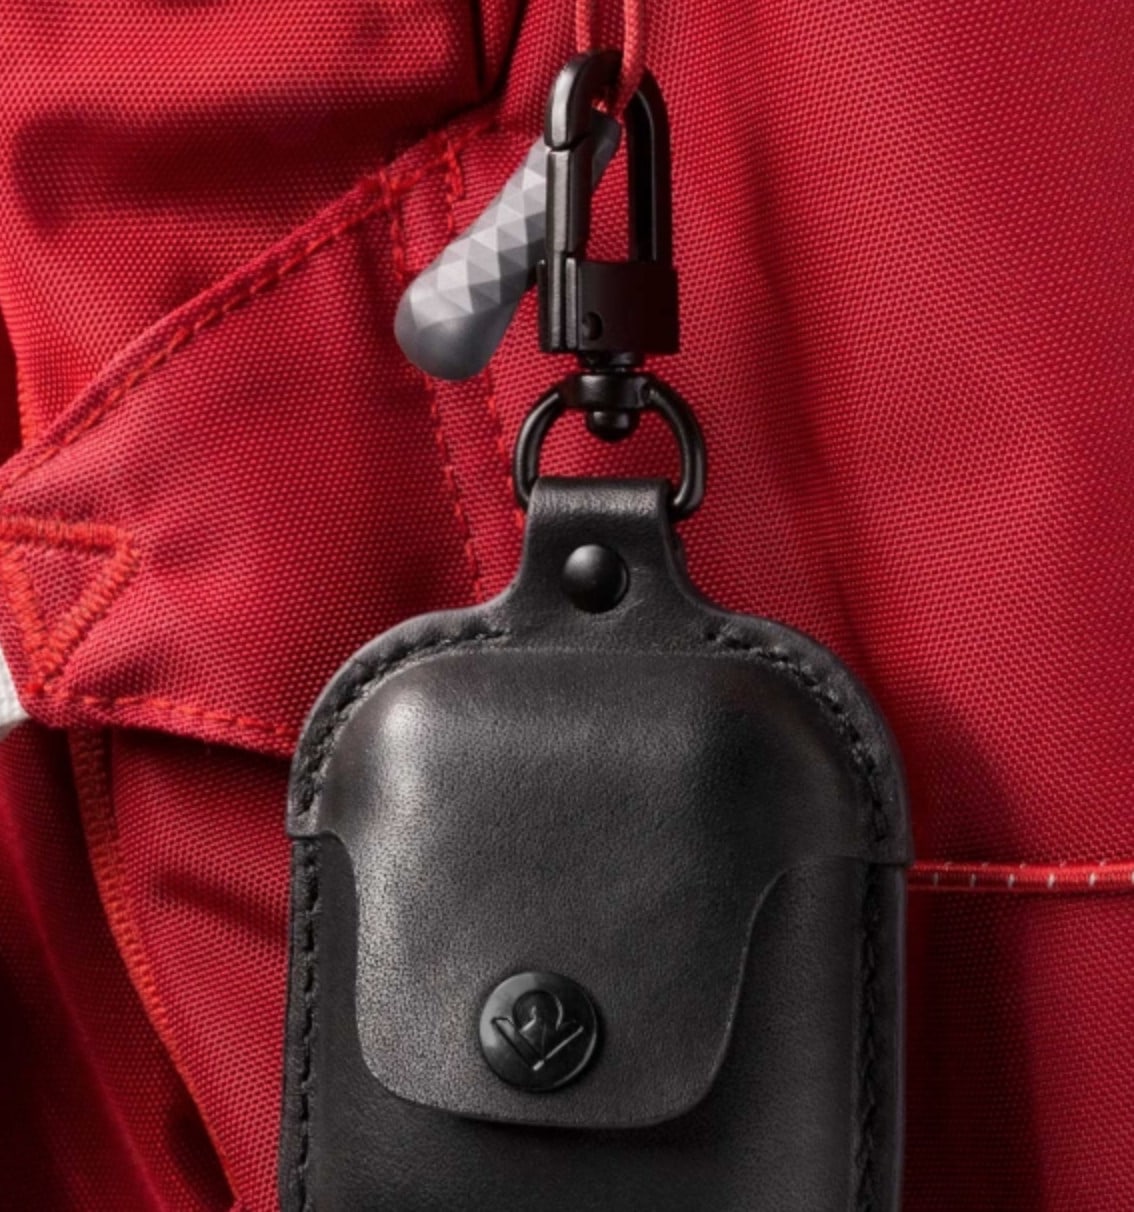 The AirSnap in ash black makes a handsome accessory to any bag, backpack or keychain.